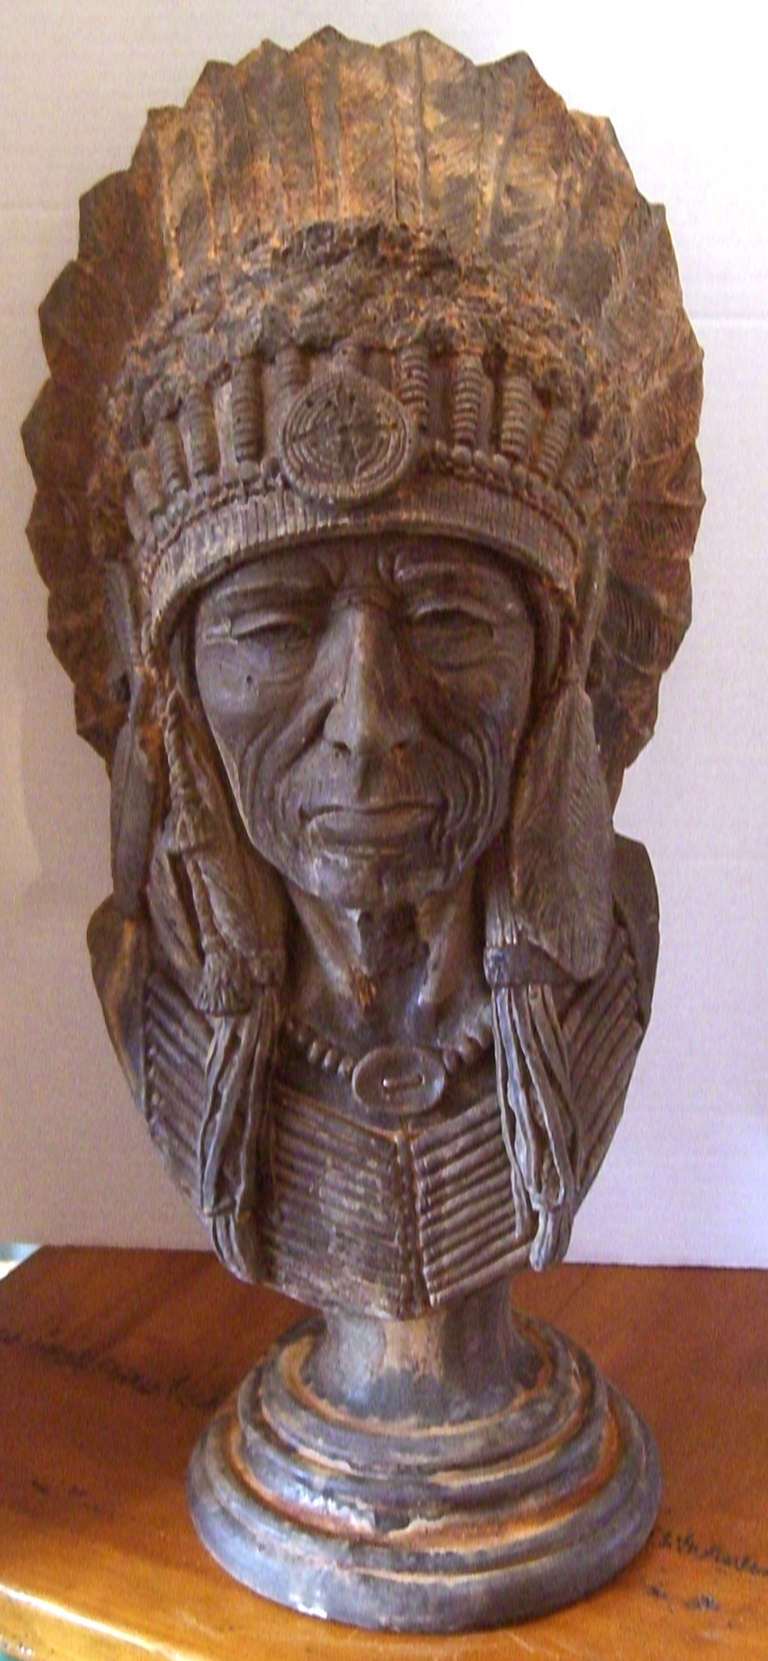 A painted cast stone bust of a Native American Indian Chief in Full Headdress.  Designed and crafted by Gary Apsit.